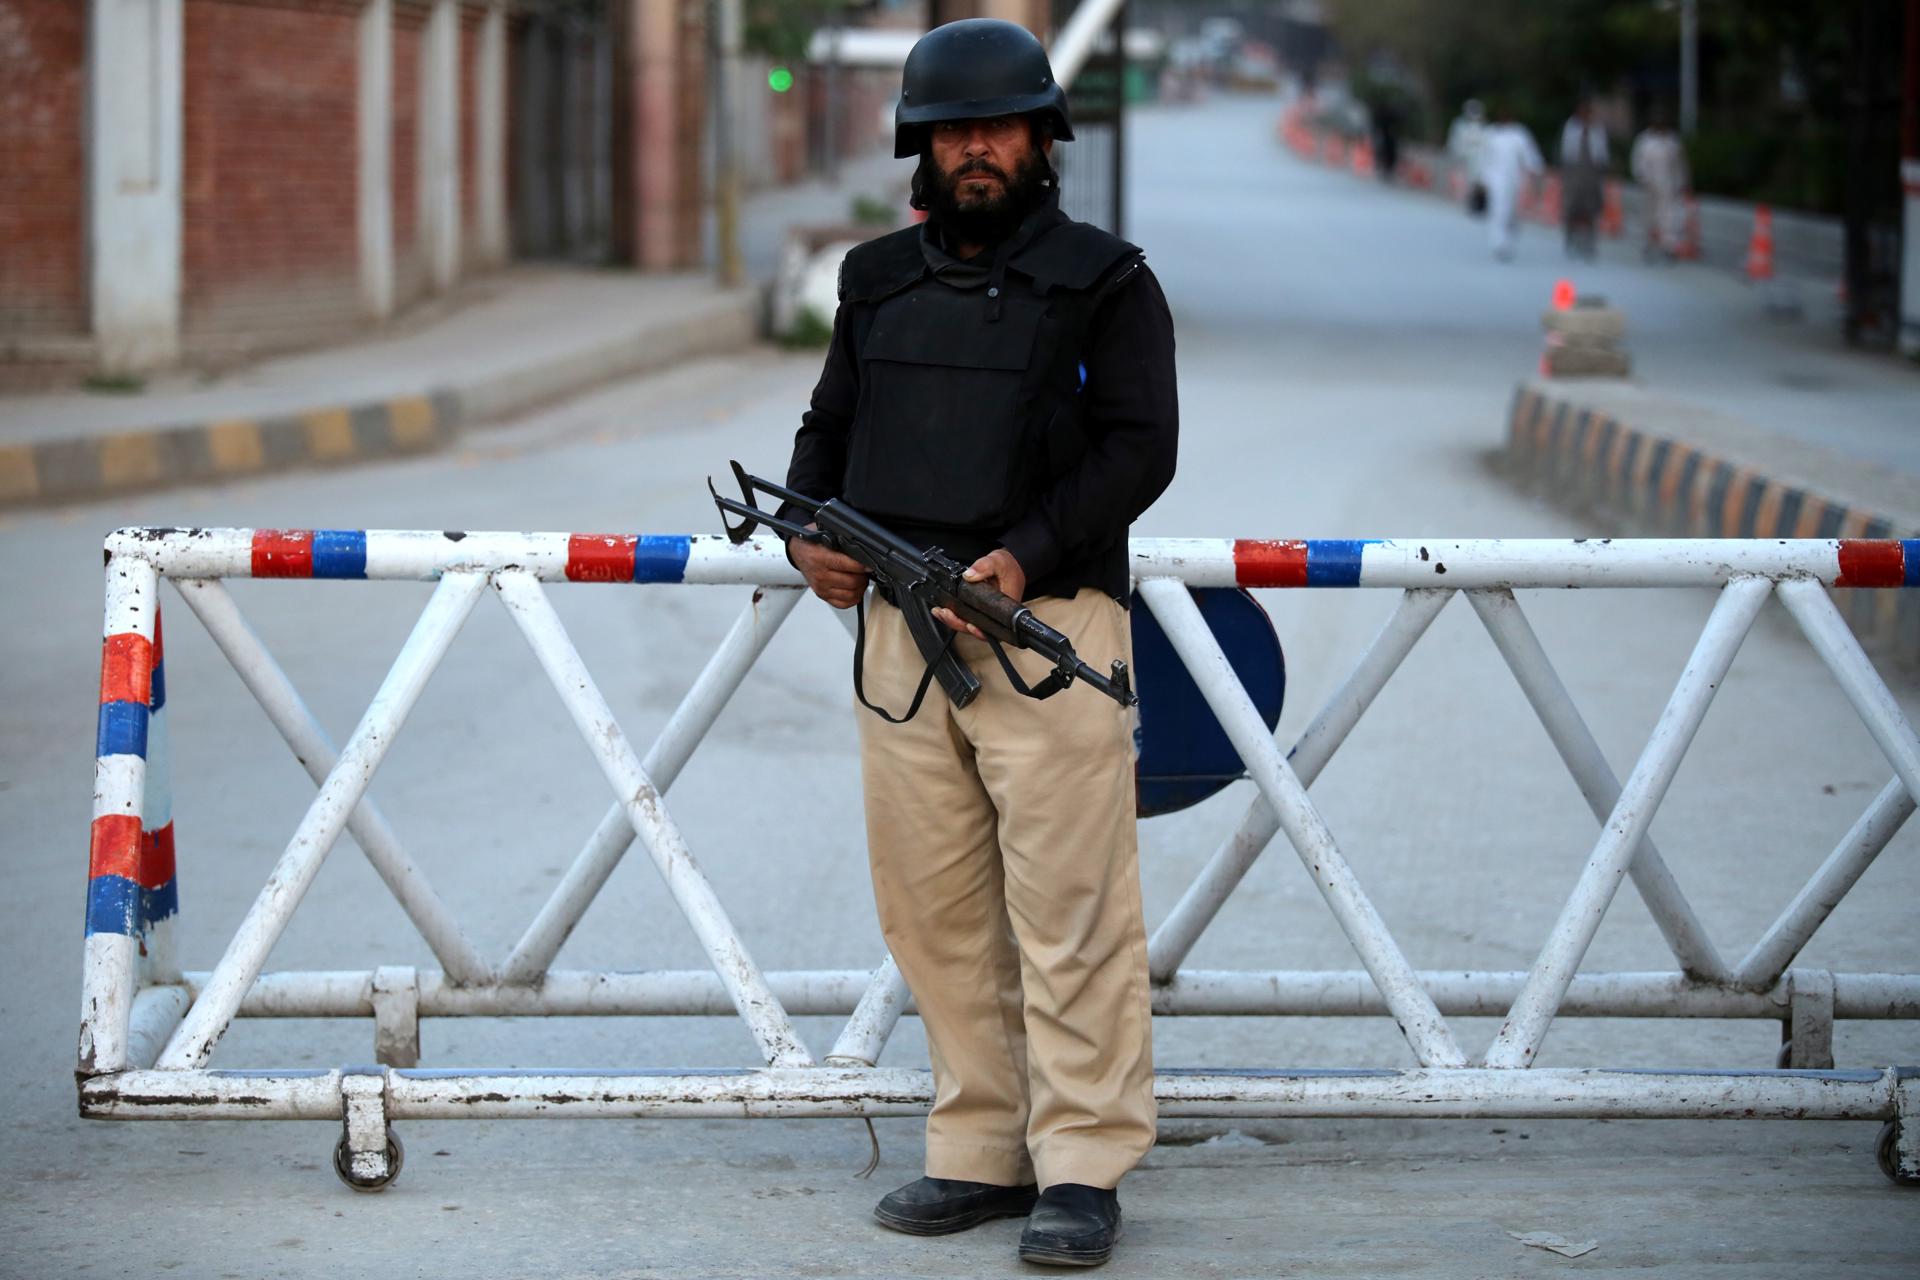 A Pakistani security official stands guard at a check point in Peshawar, the provincial capital of KPK province, Pakistan, 13 March 2023. EFE/EPA/FILE/BILAWAL ARBAB